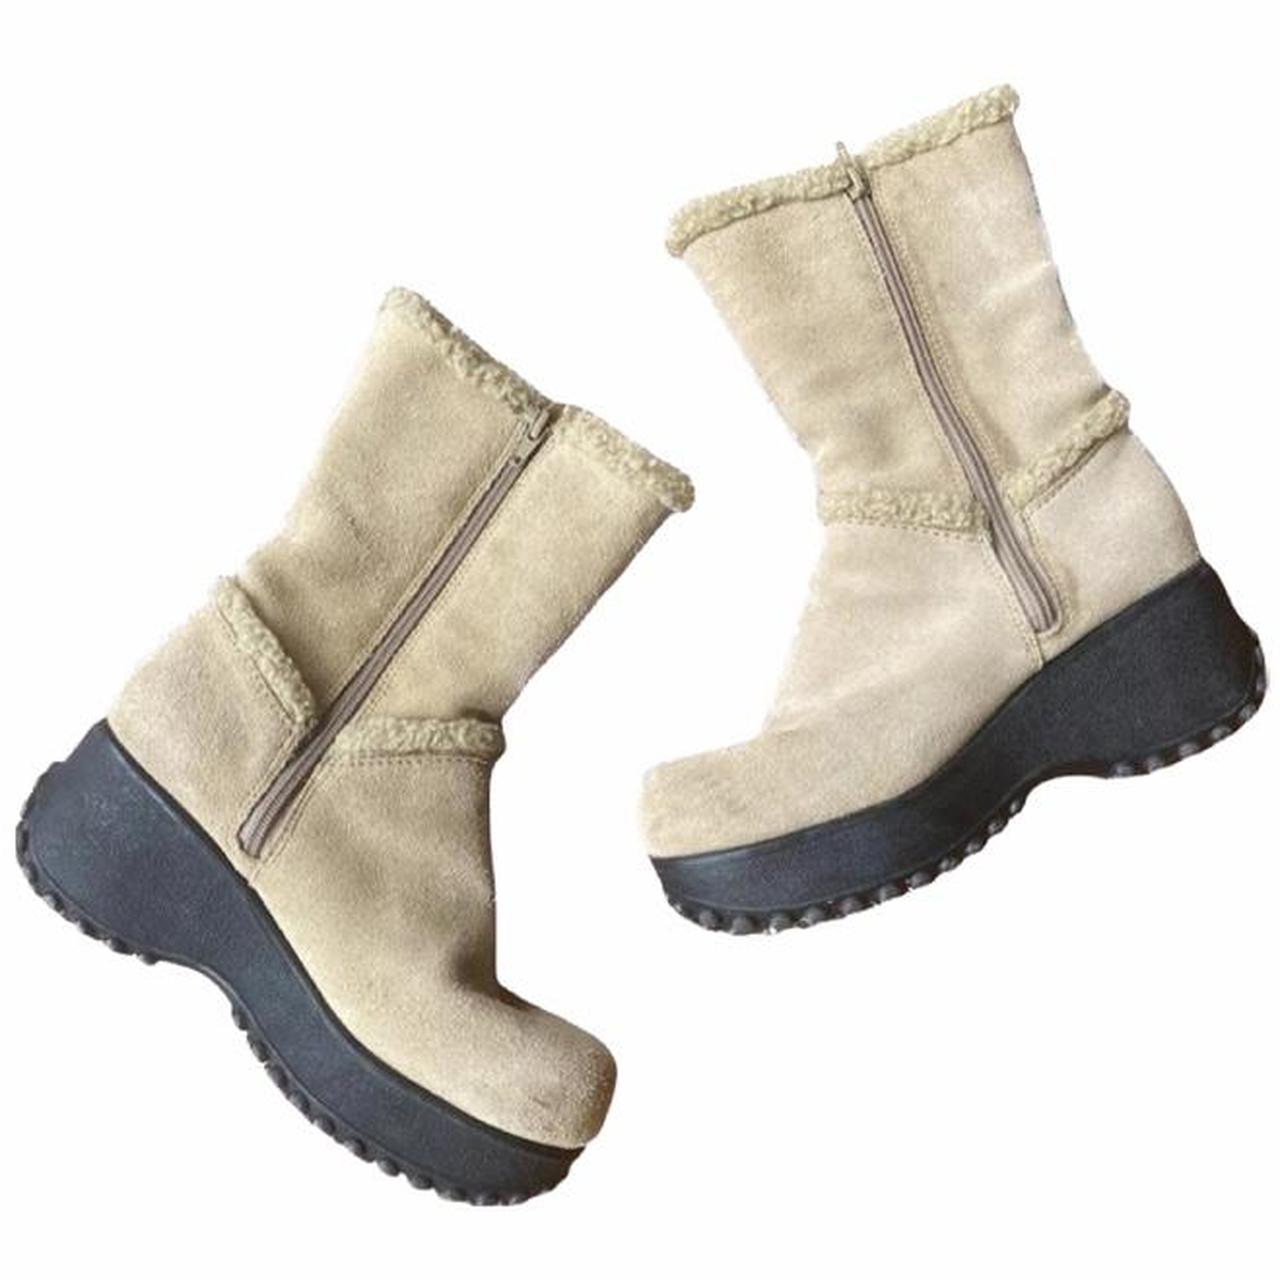 Product Image 2 - Chunky y2k platform suede boots
——————
-In